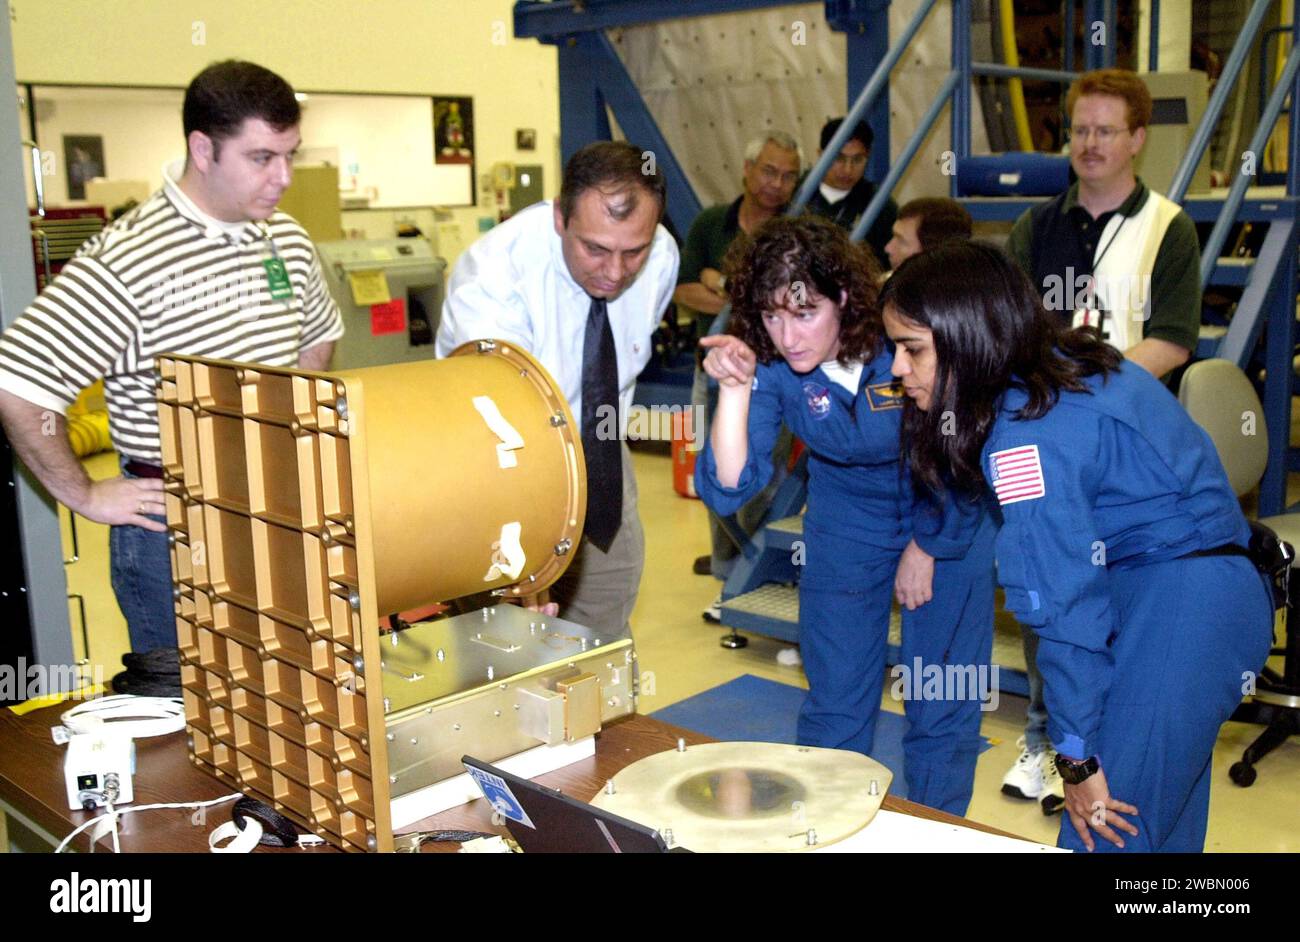 KENNEDY SPACE CENTER, FLA. - At SPACEHAB, Cape Canaveral, Fla., members of the STS-107 crew familiarize themselves with experiments and equipment for the mission. Pointing at a piece of equipment (center) is Mission Specialist Laurel Clark . At right is Mission Specialist Kalpana Chawla. STS-107 is a research mission. The primary payload is the first flight of the SHI Research Double Module (SHI RDM). The experiments range from material sciences to life sciences (many rats). Also part of the payload is the Fast Reaction Experiments Enabling Science, Technology, Applications and Research (FREES Stock Photo